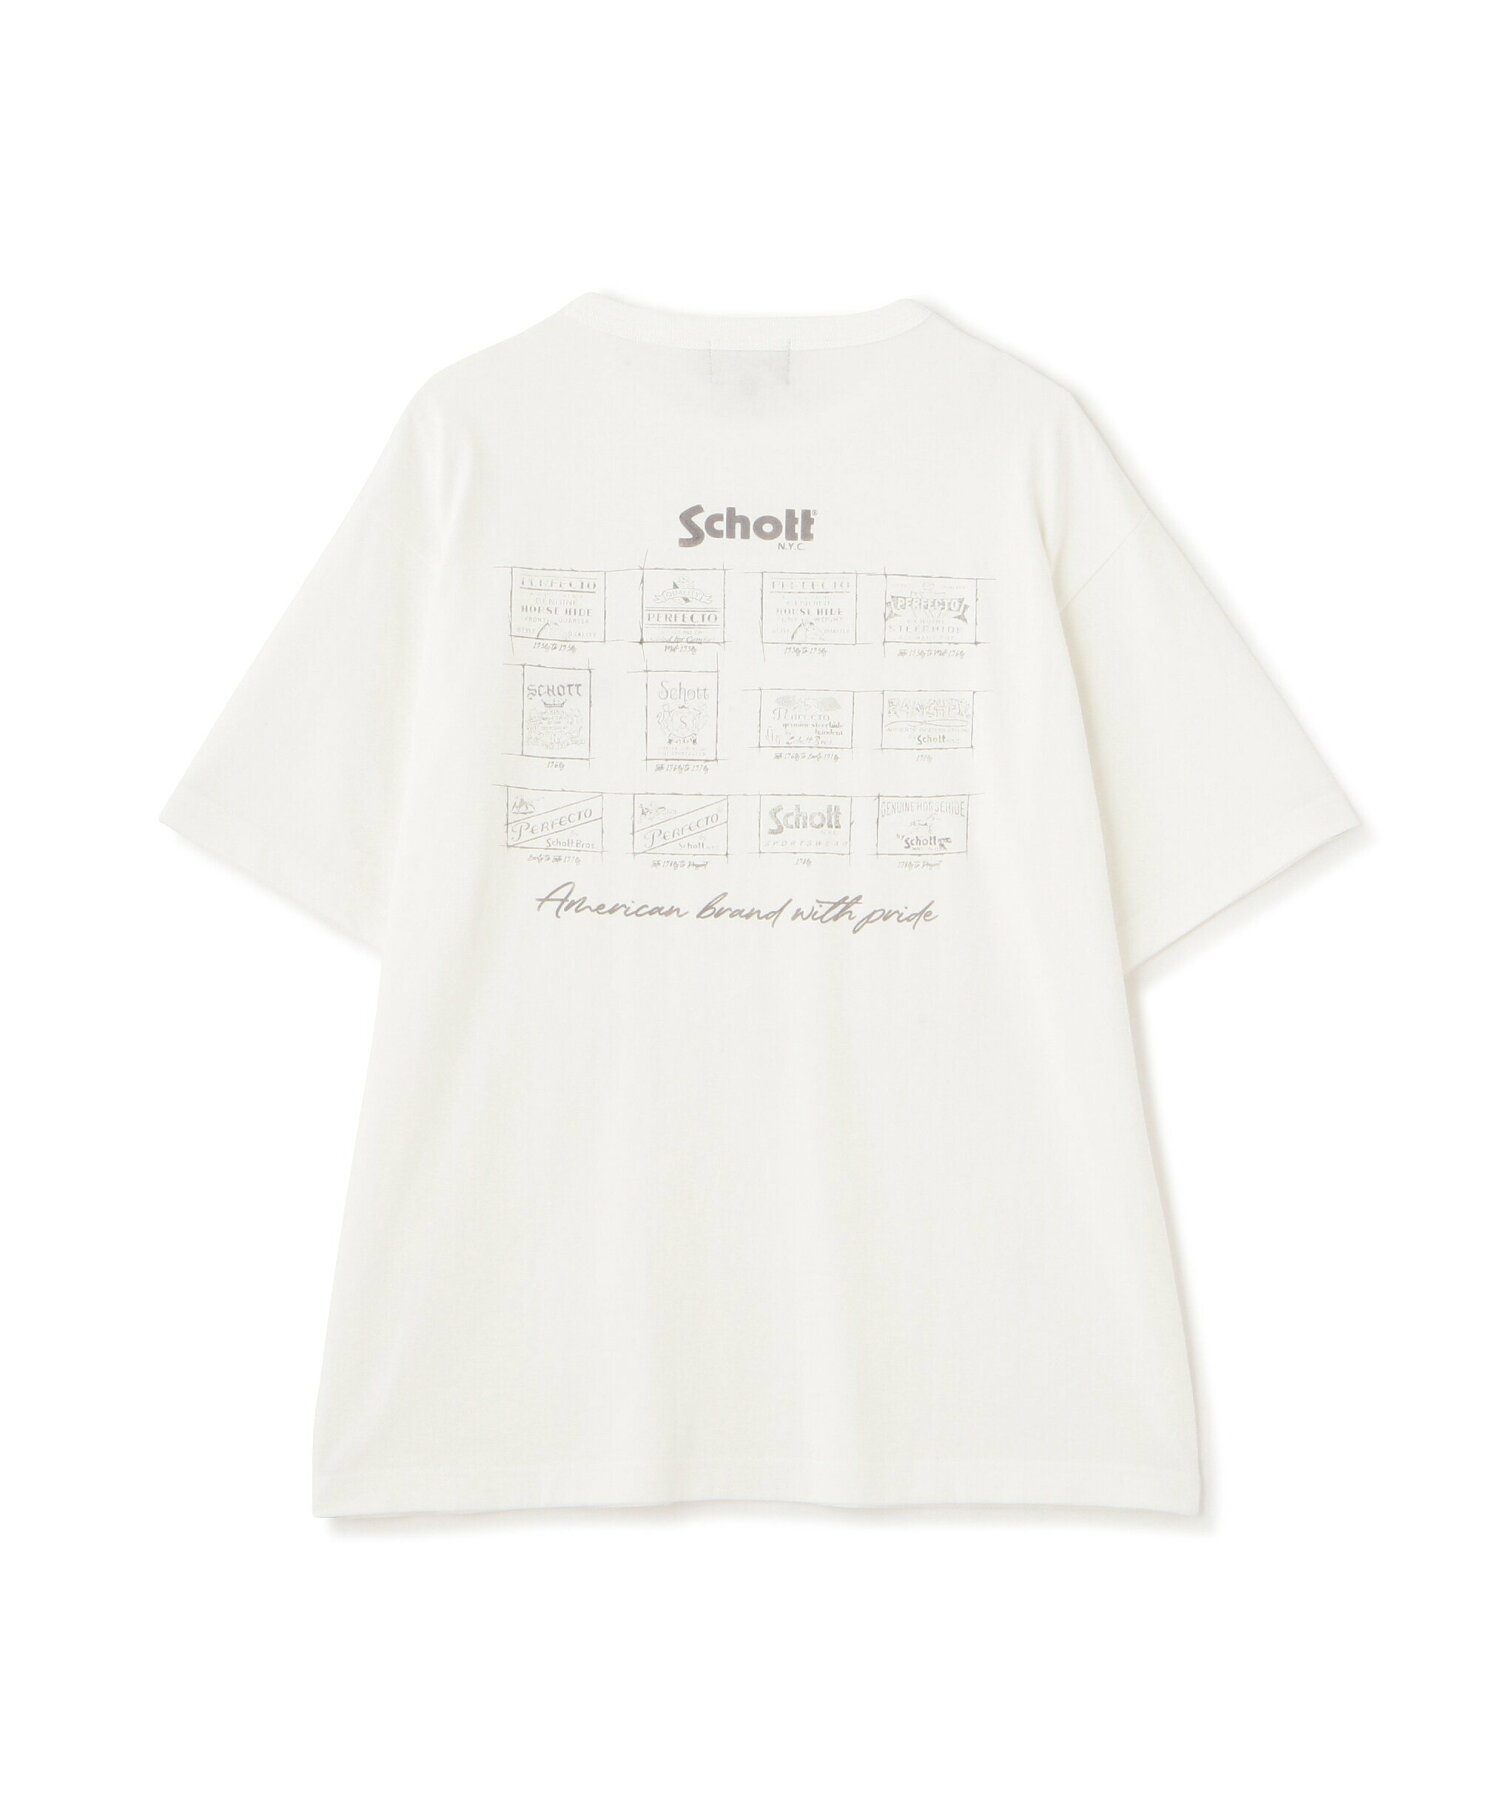 T-SHIRT "ARCHIVE STAMPS"/Tシャツ "アーカイブスタンプ